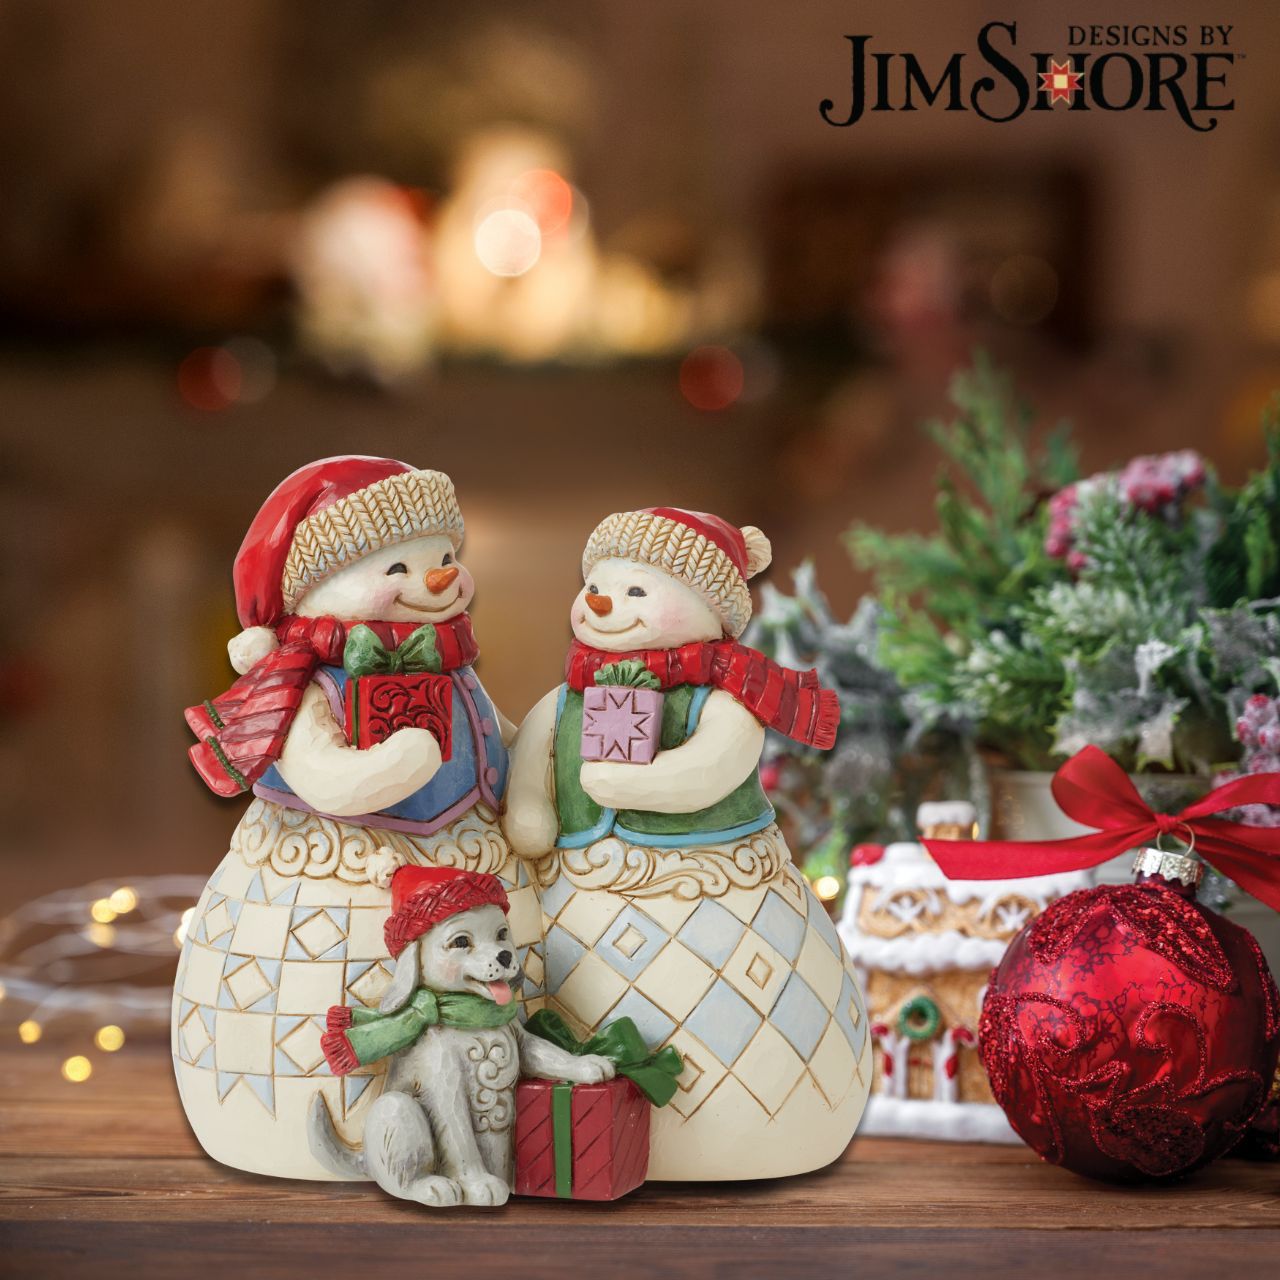 Heartwood Creek Christmas Collection Snowman Couple with Puppy Figurine  Designed by award winning artist Jim Shore as part of the Heartwood Creek Christmas Collection, hand crafted using high quality cast stone and hand painted, this Snowman couple with their cute puppy is perfect for the Christmas season. Packaging: Full colour, fully branded gift box with photo.